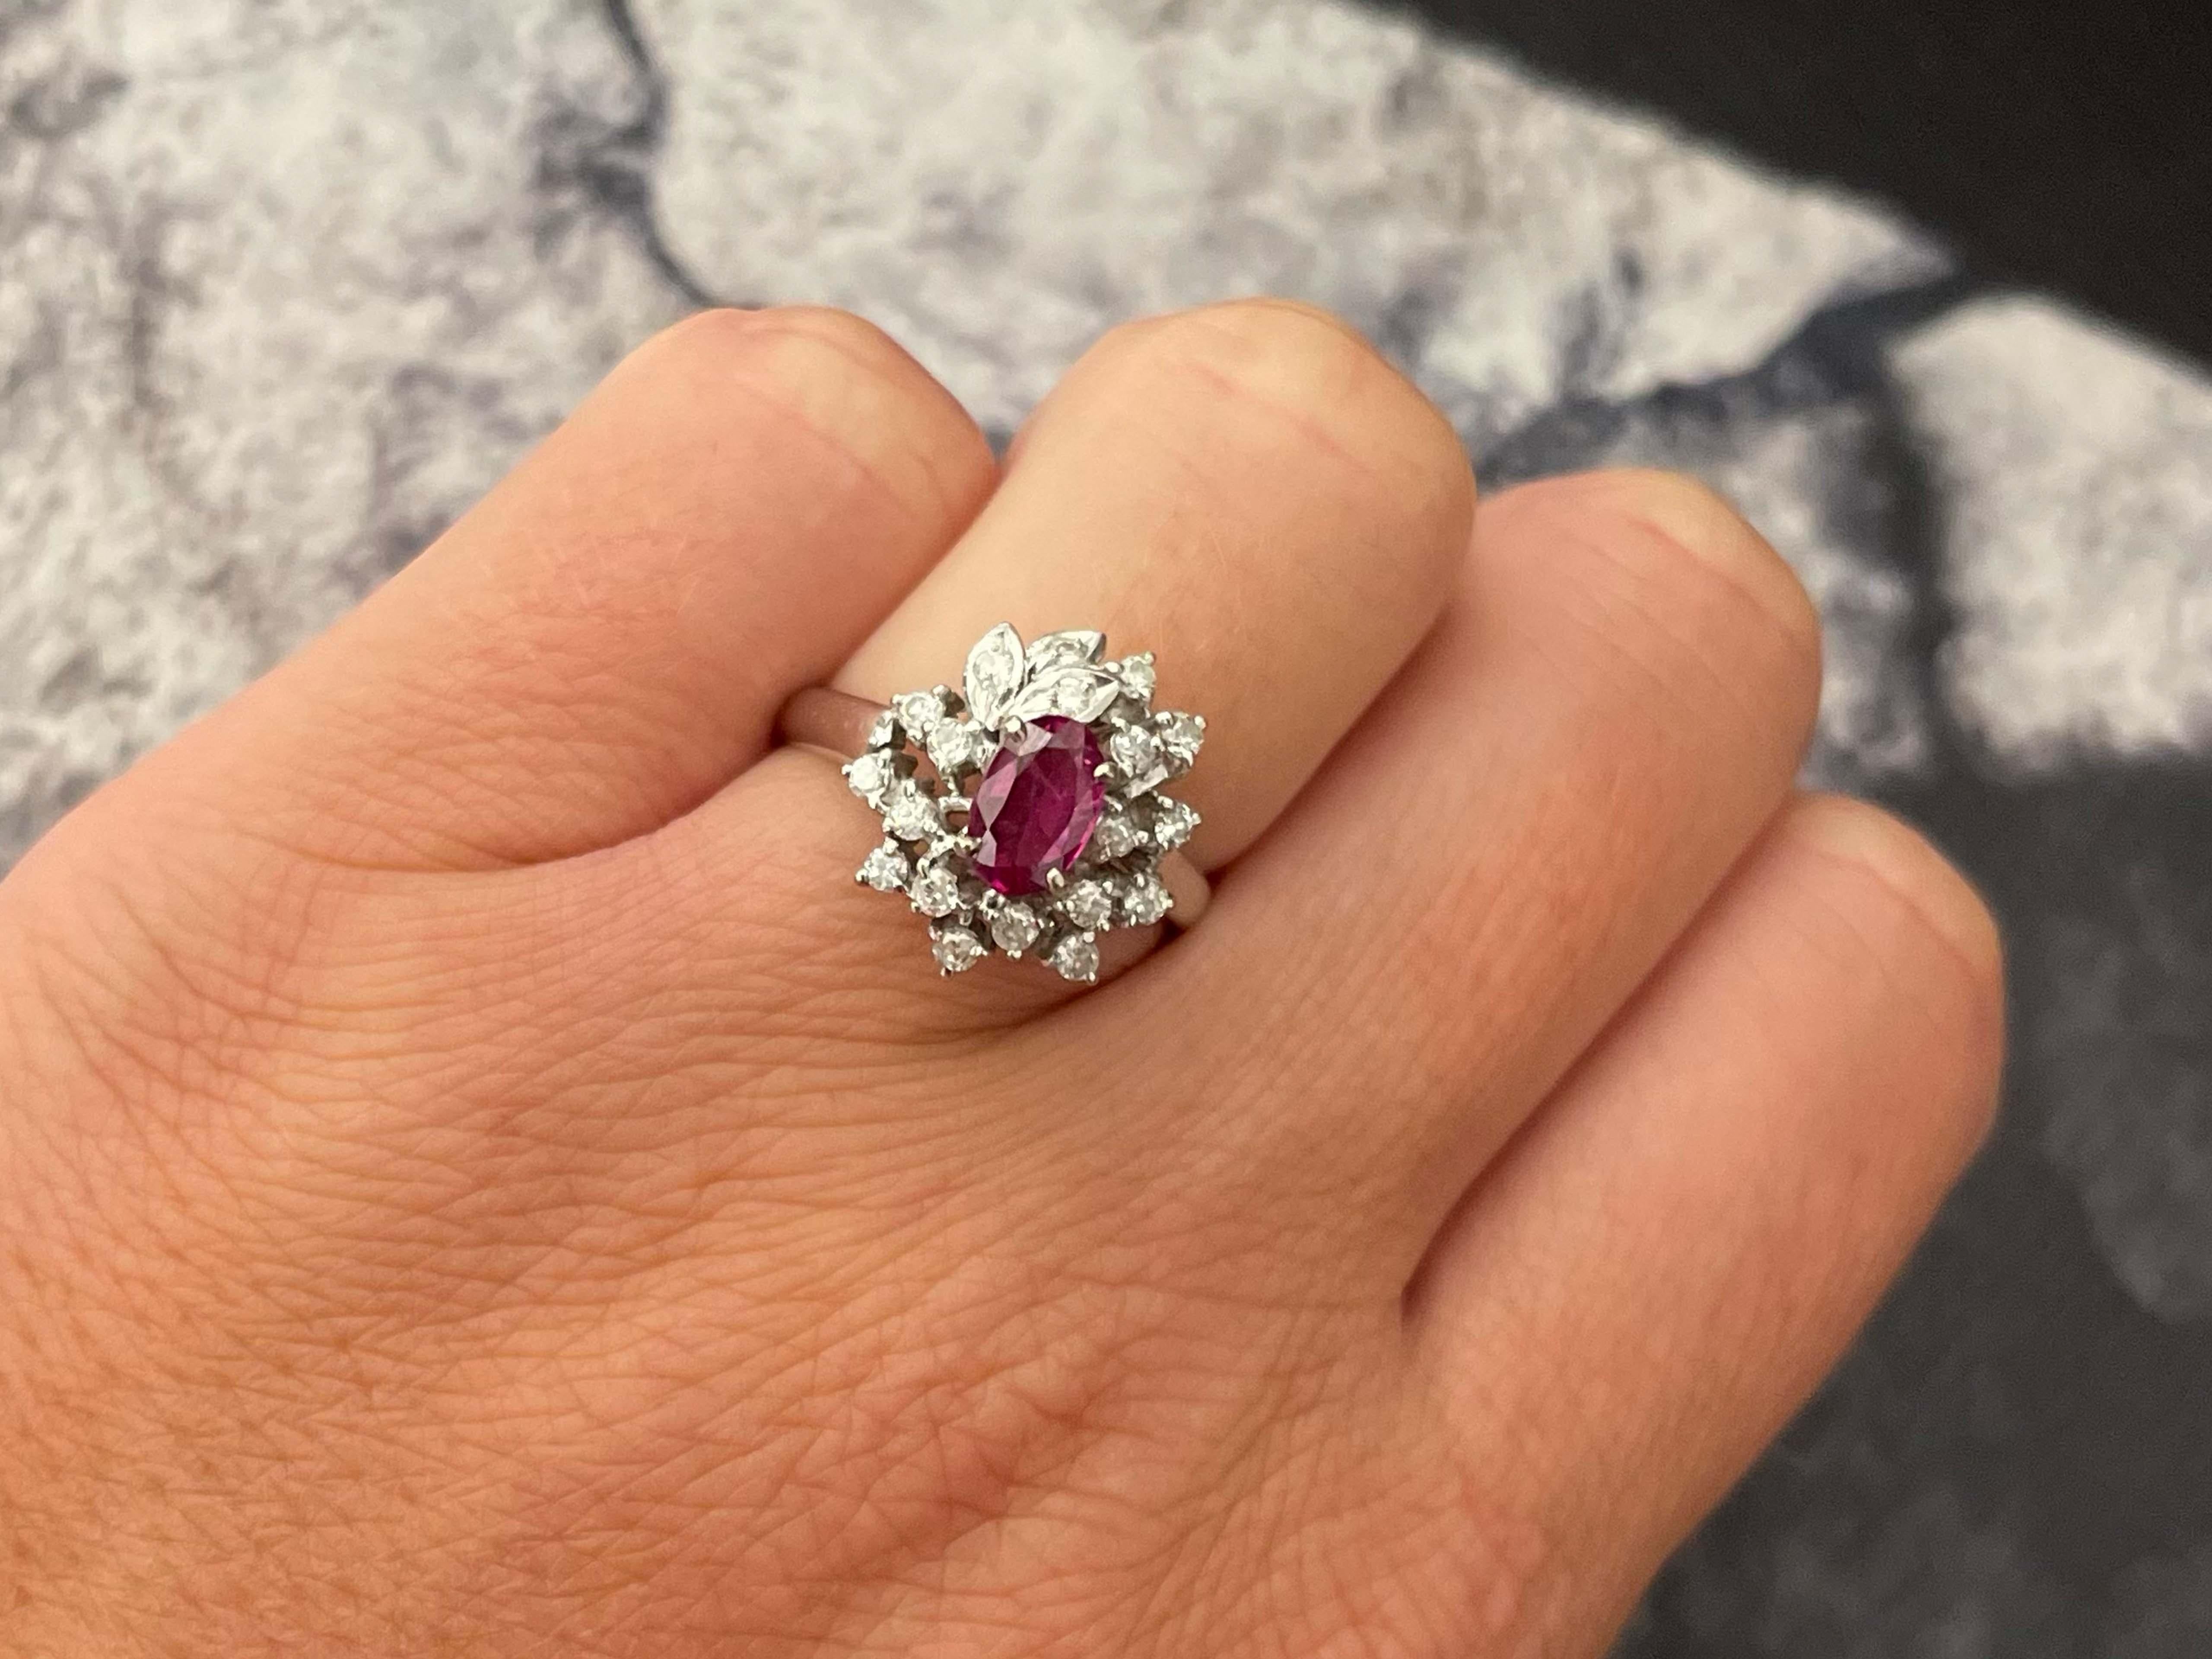 Item Specifications:

Metal: 14K White Gold

Style: Statement Ring

Ring Size: 7 (resizing available for a fee)

Total Weight: 4.2 Grams

Gemstone Specifications:

Gemstones: 1 red ruby

Ruby Carat Weight: 0.57 carats

Diamond Carat Weight: 0.15